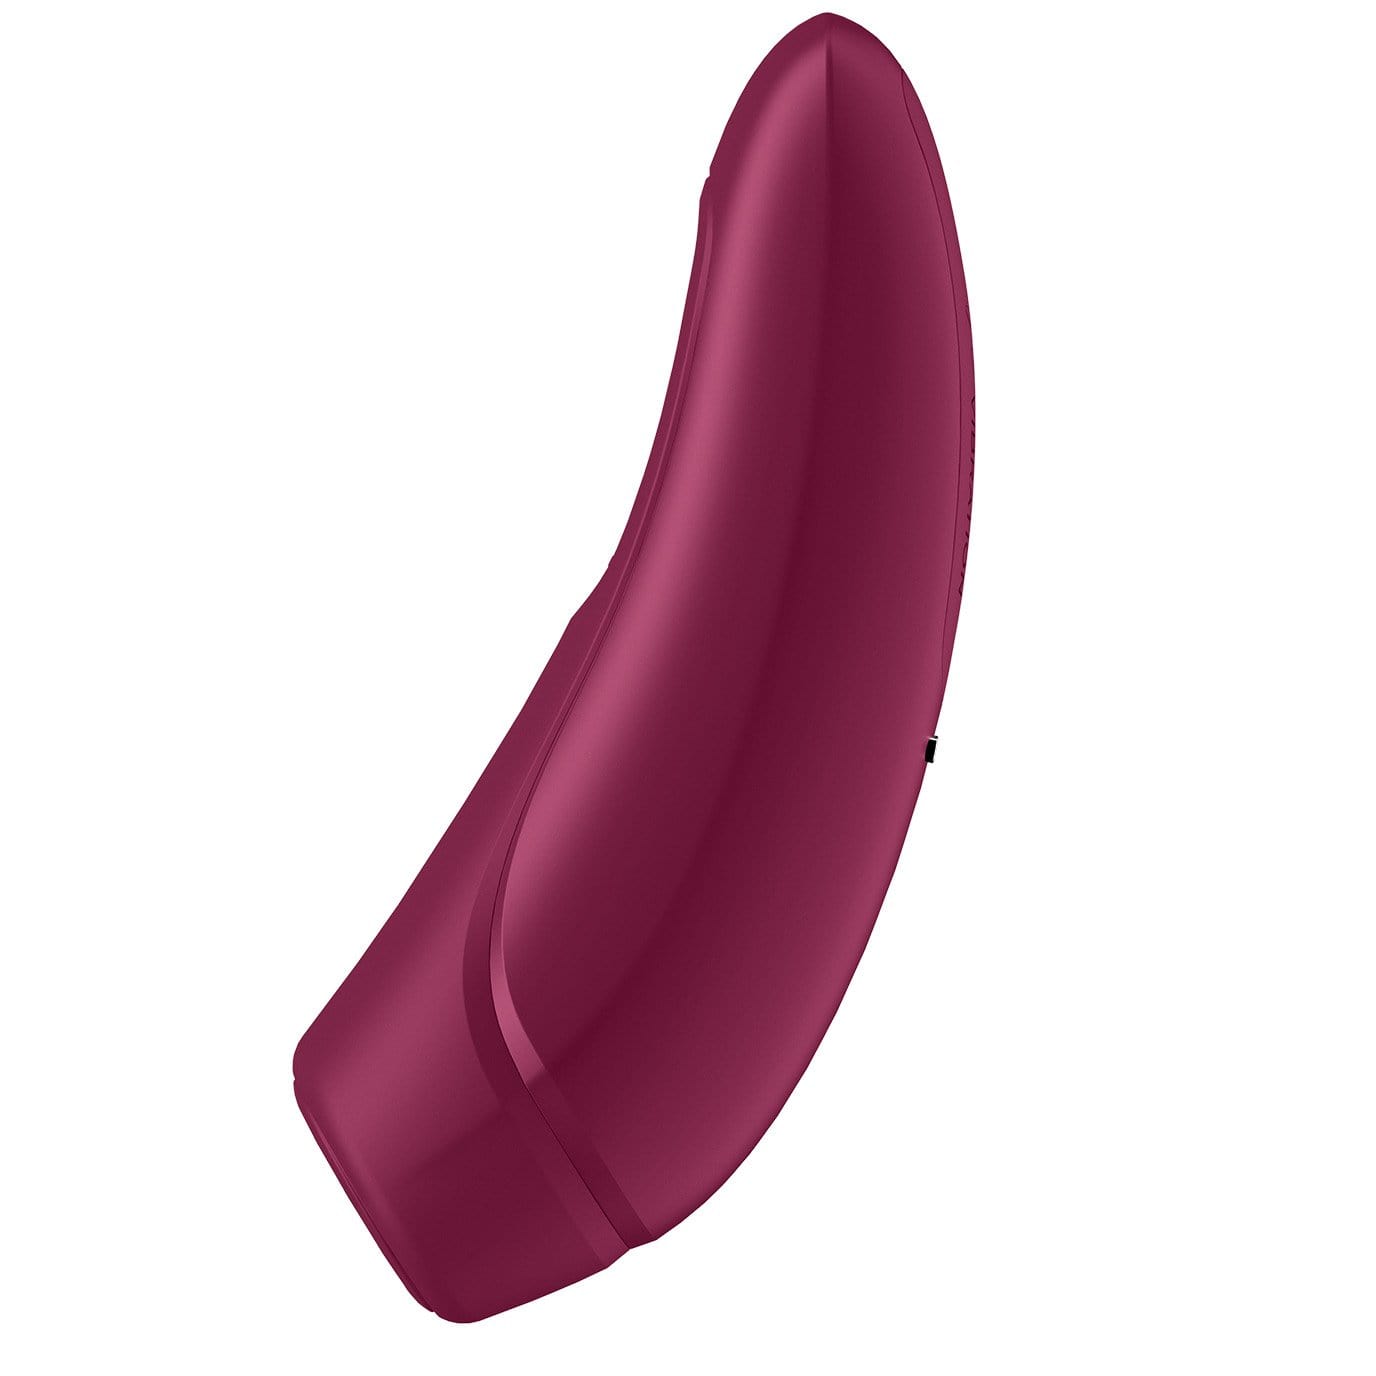 [FREE GIFT] Satisfyer Curvy 1+ App-Controlled Air Pulse Stimulator Vibrator -  Clit Massager (Vibration) Rechargeable  Durio.sg